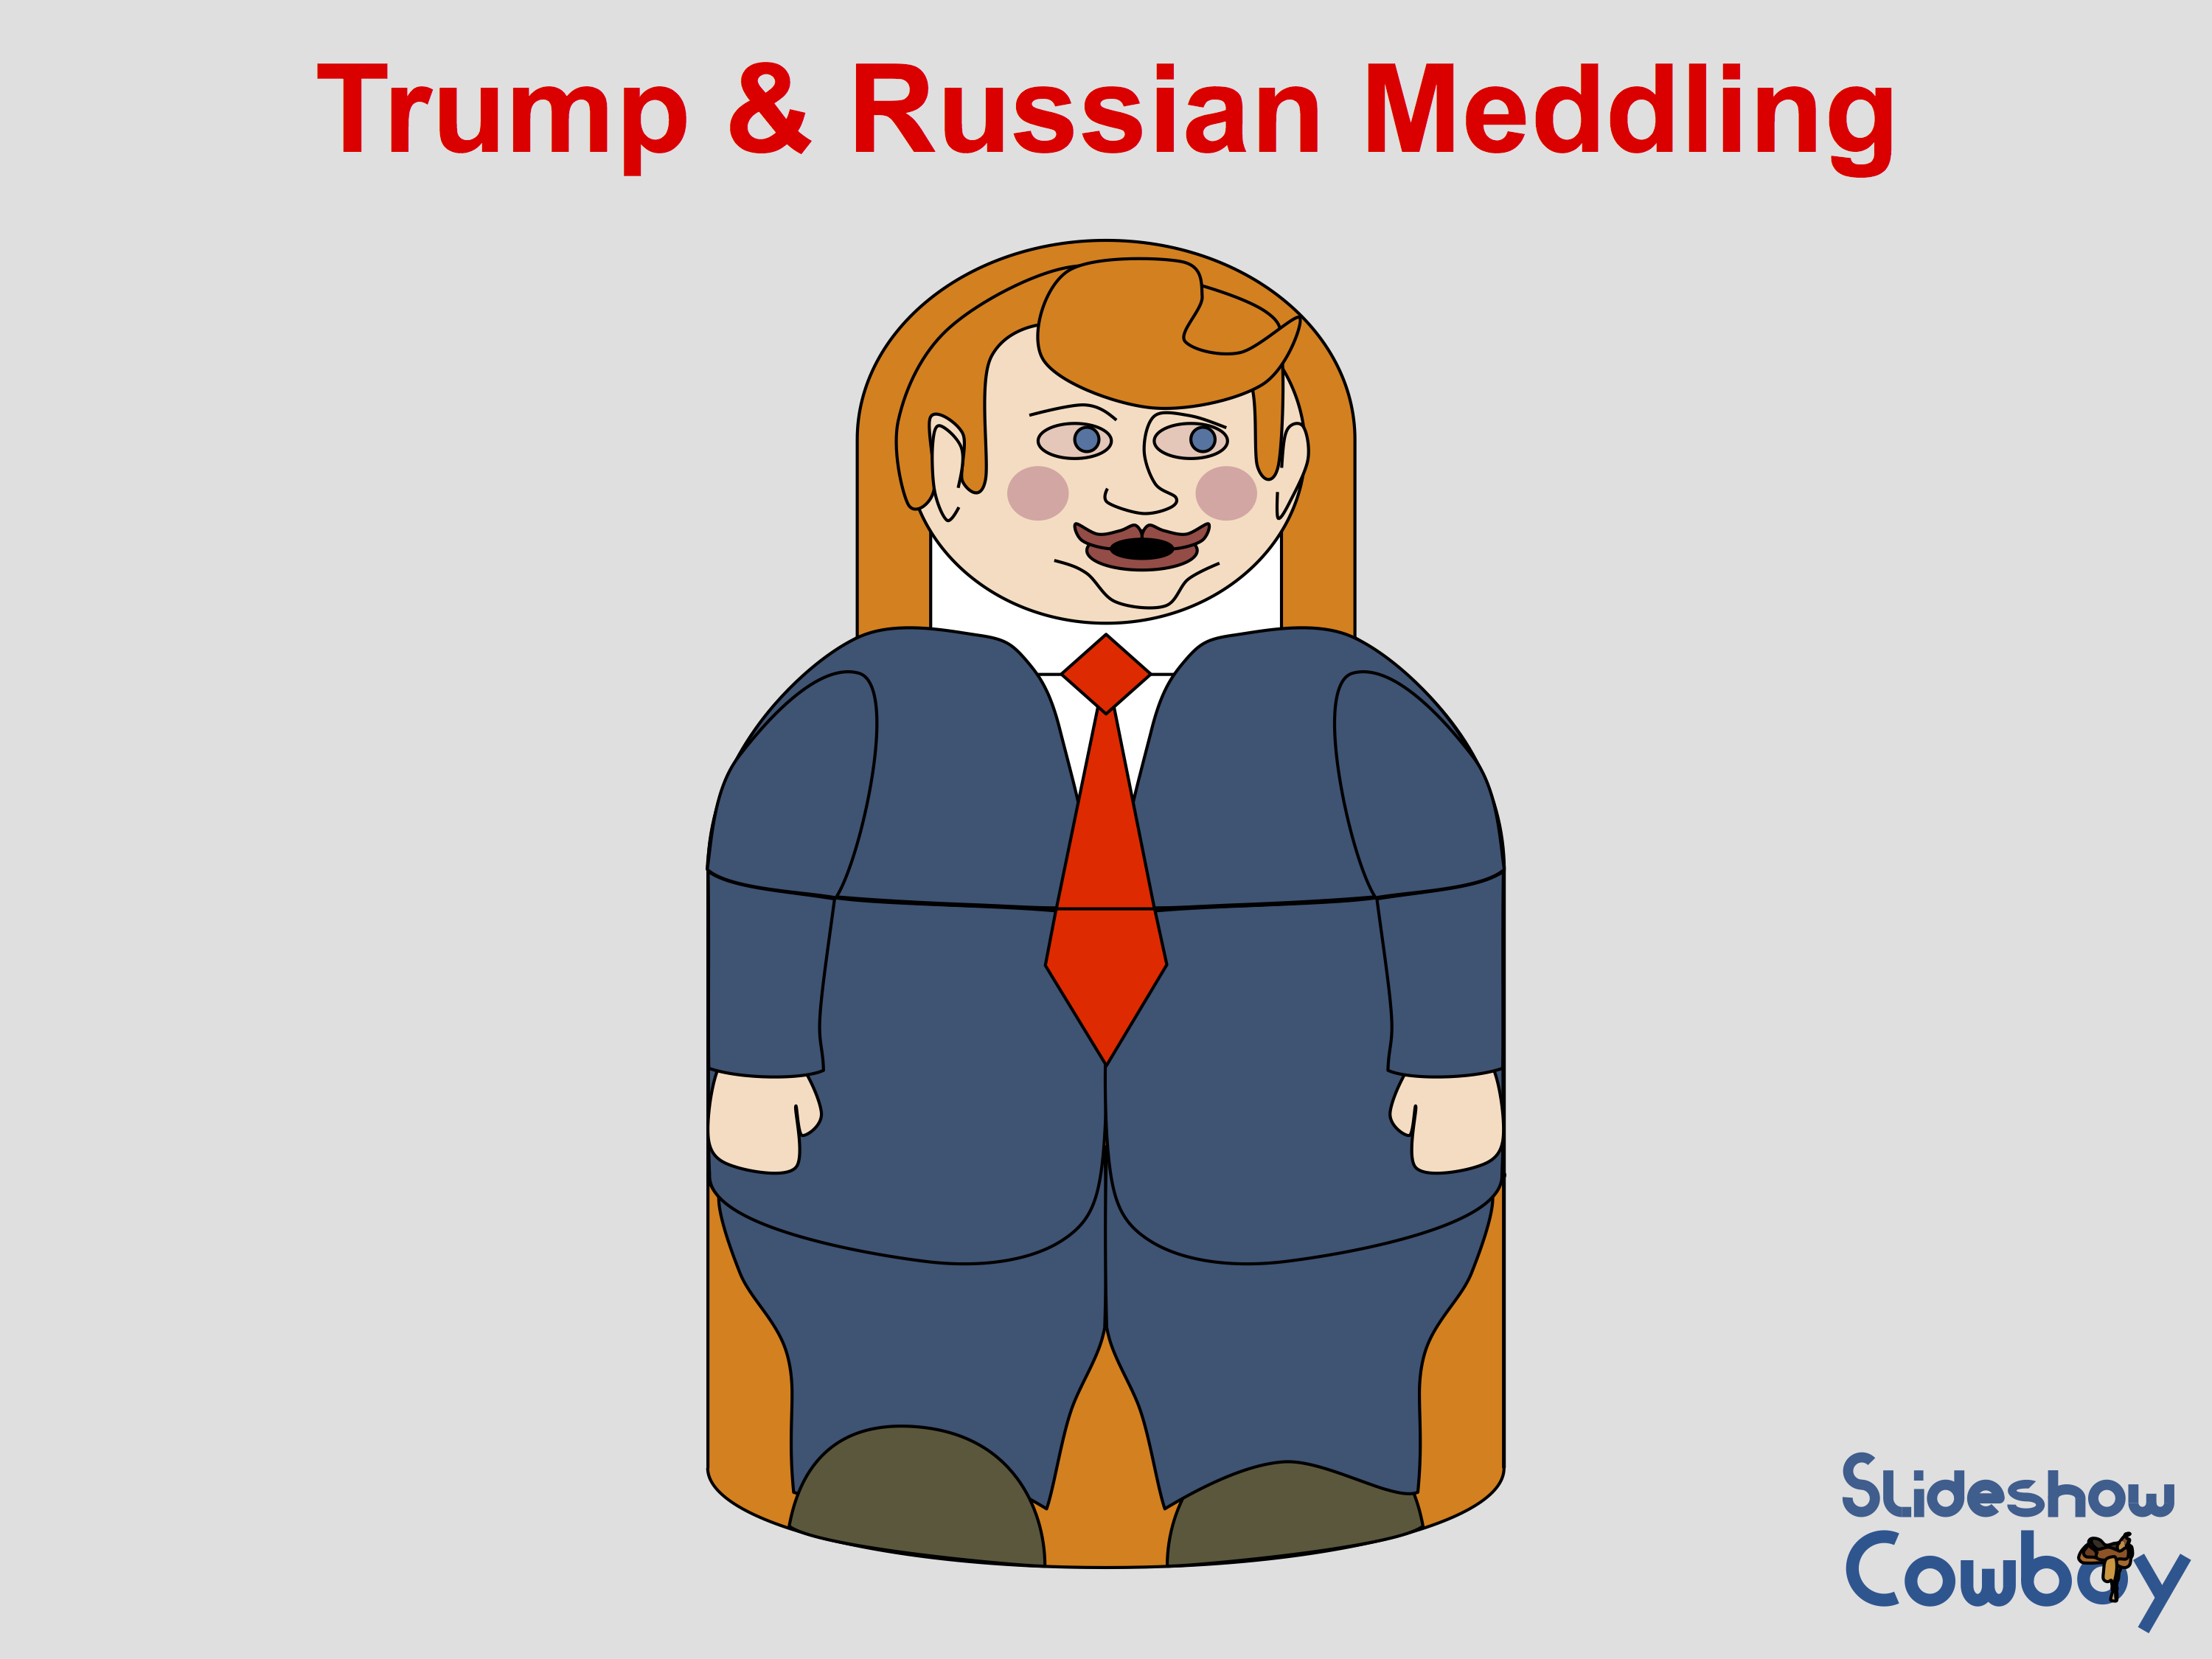 Trump and Russian Meddling